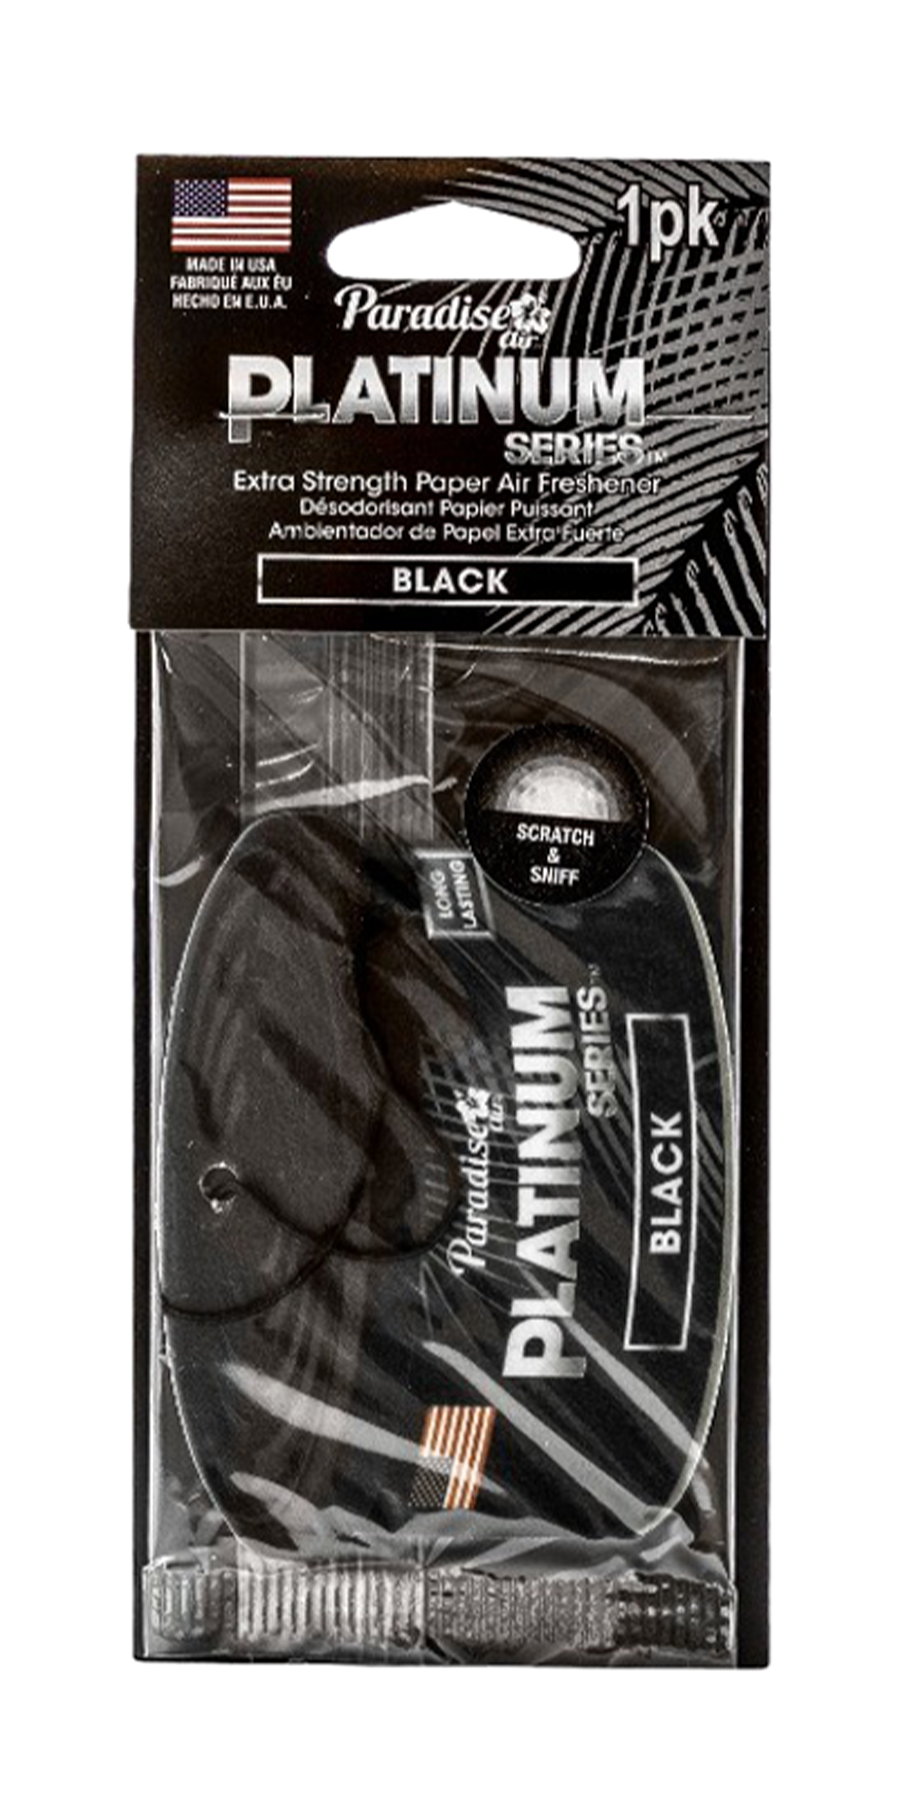  Product labelled "Paradise Platinum Series", an extra strength paper air freshener in black scent, made in the USA. The packaging is predominantly black with silver details, and it includes a "scratch & sniff" feature. The product inside appears to be a black tree-shaped paper freshener.